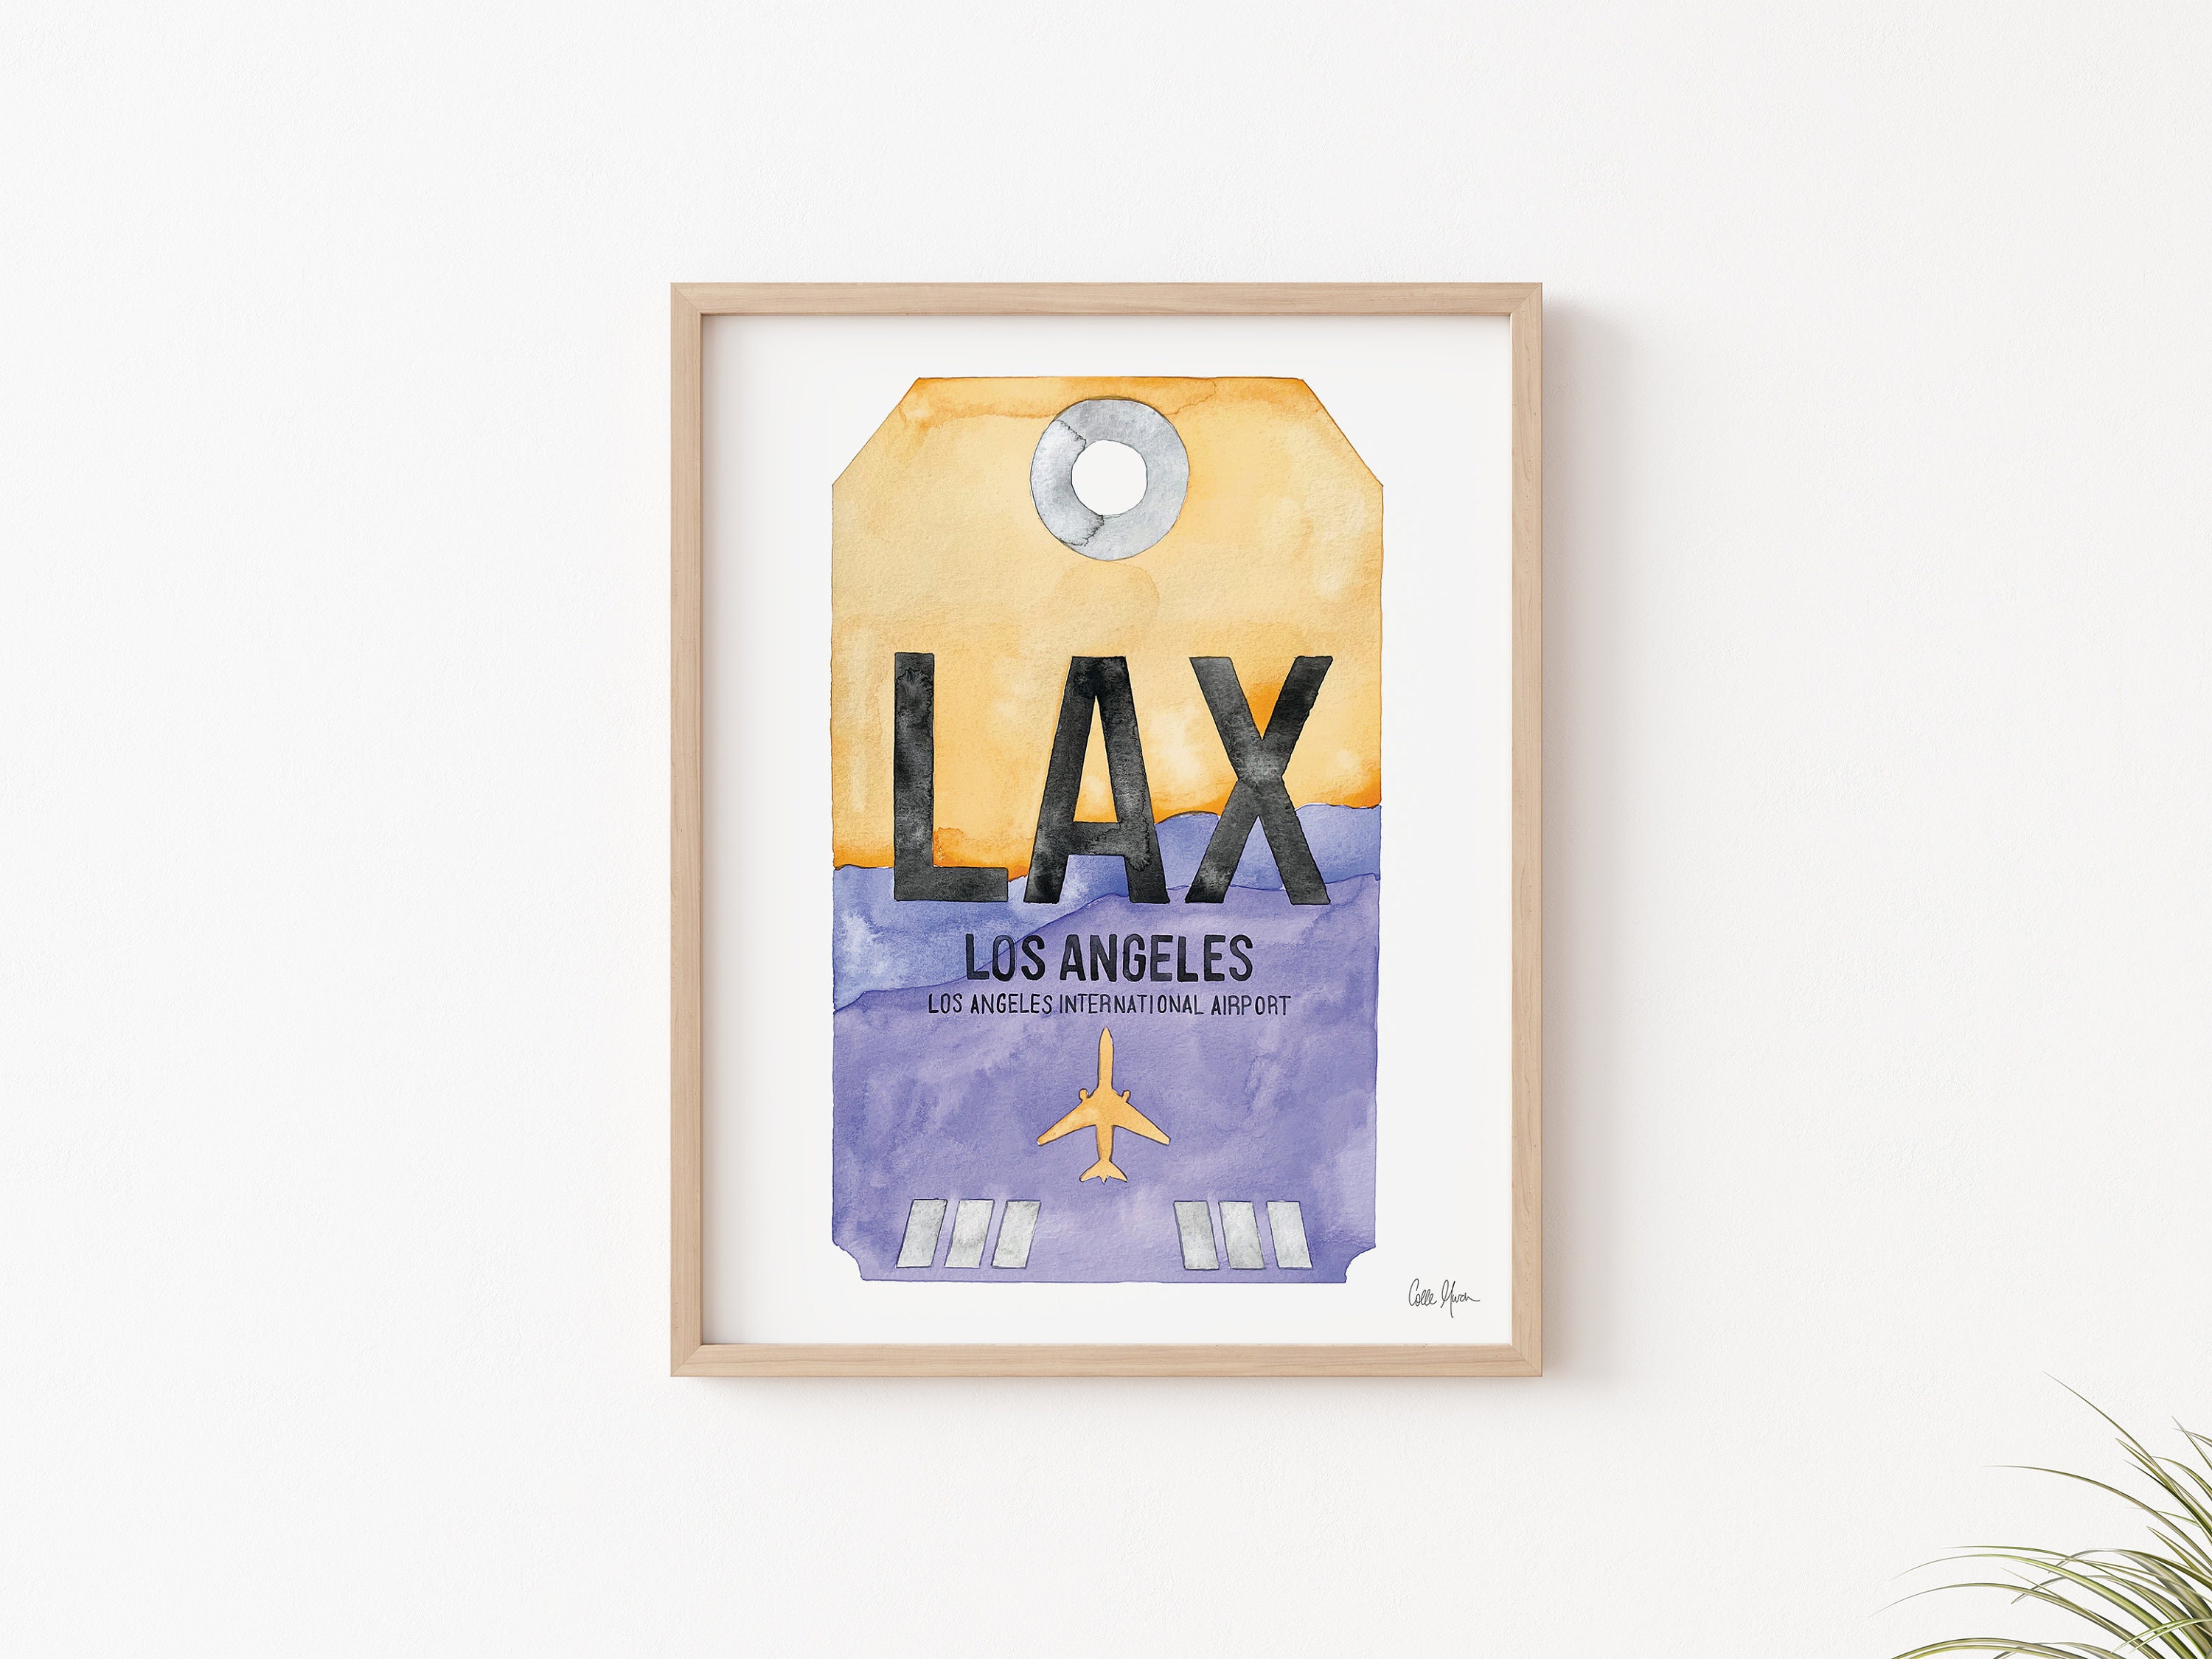 Lax Airport Poster - Etsy